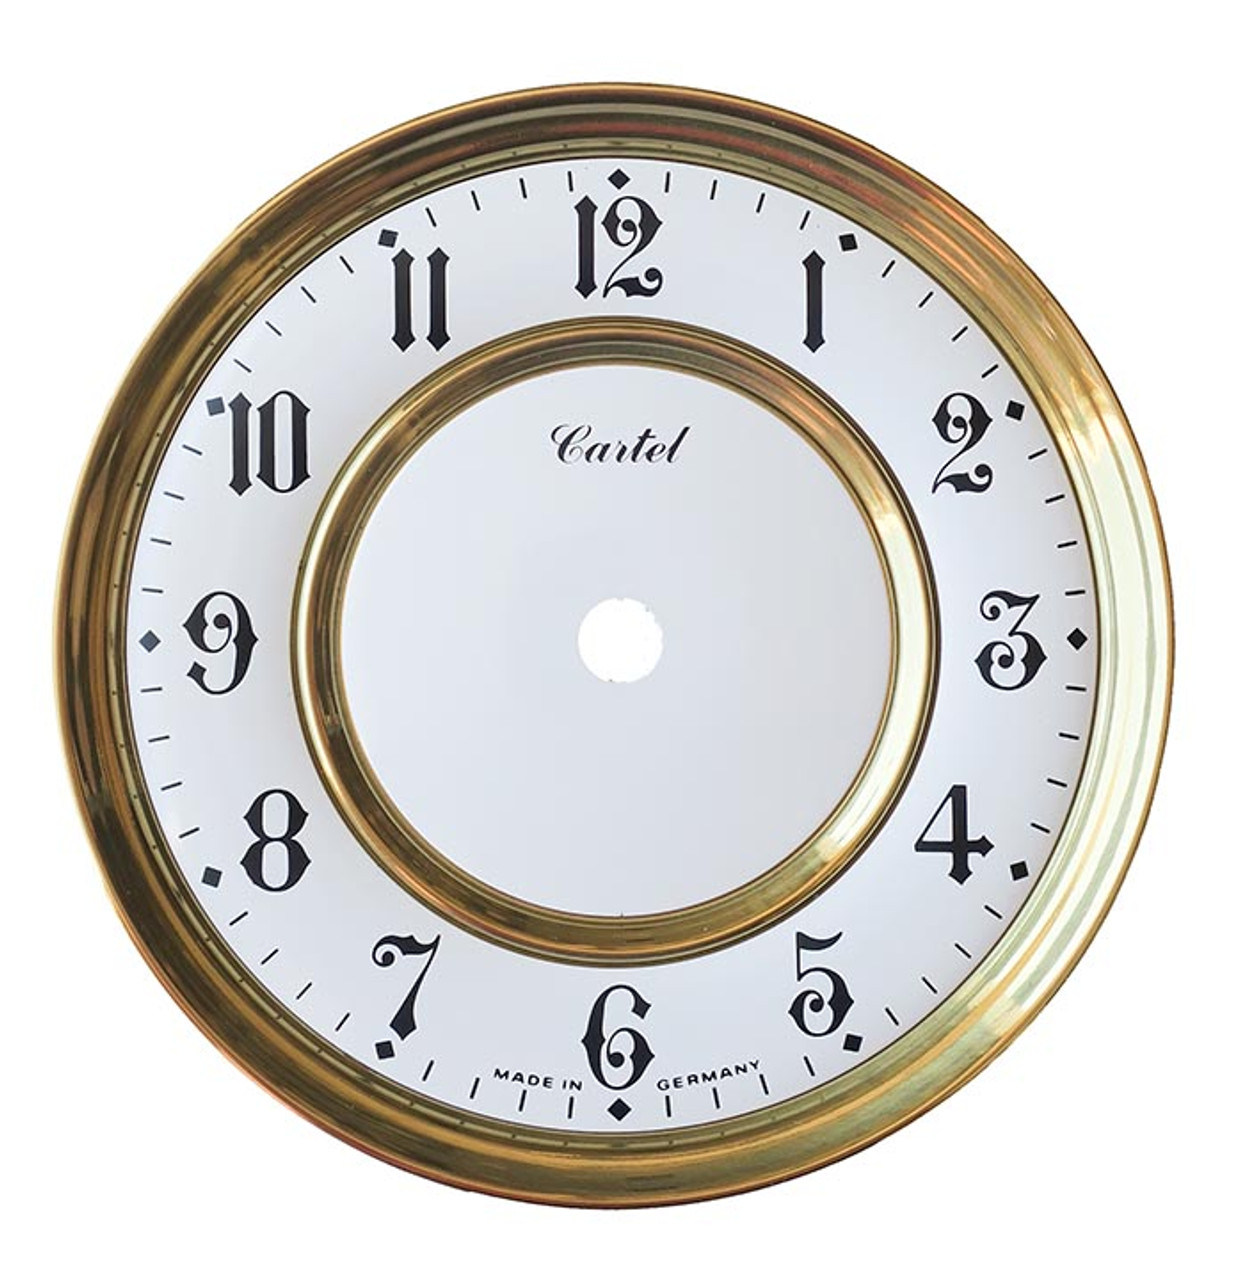 DIAL AND PAN 3 3/4" ROUND ARABIC GERMAN